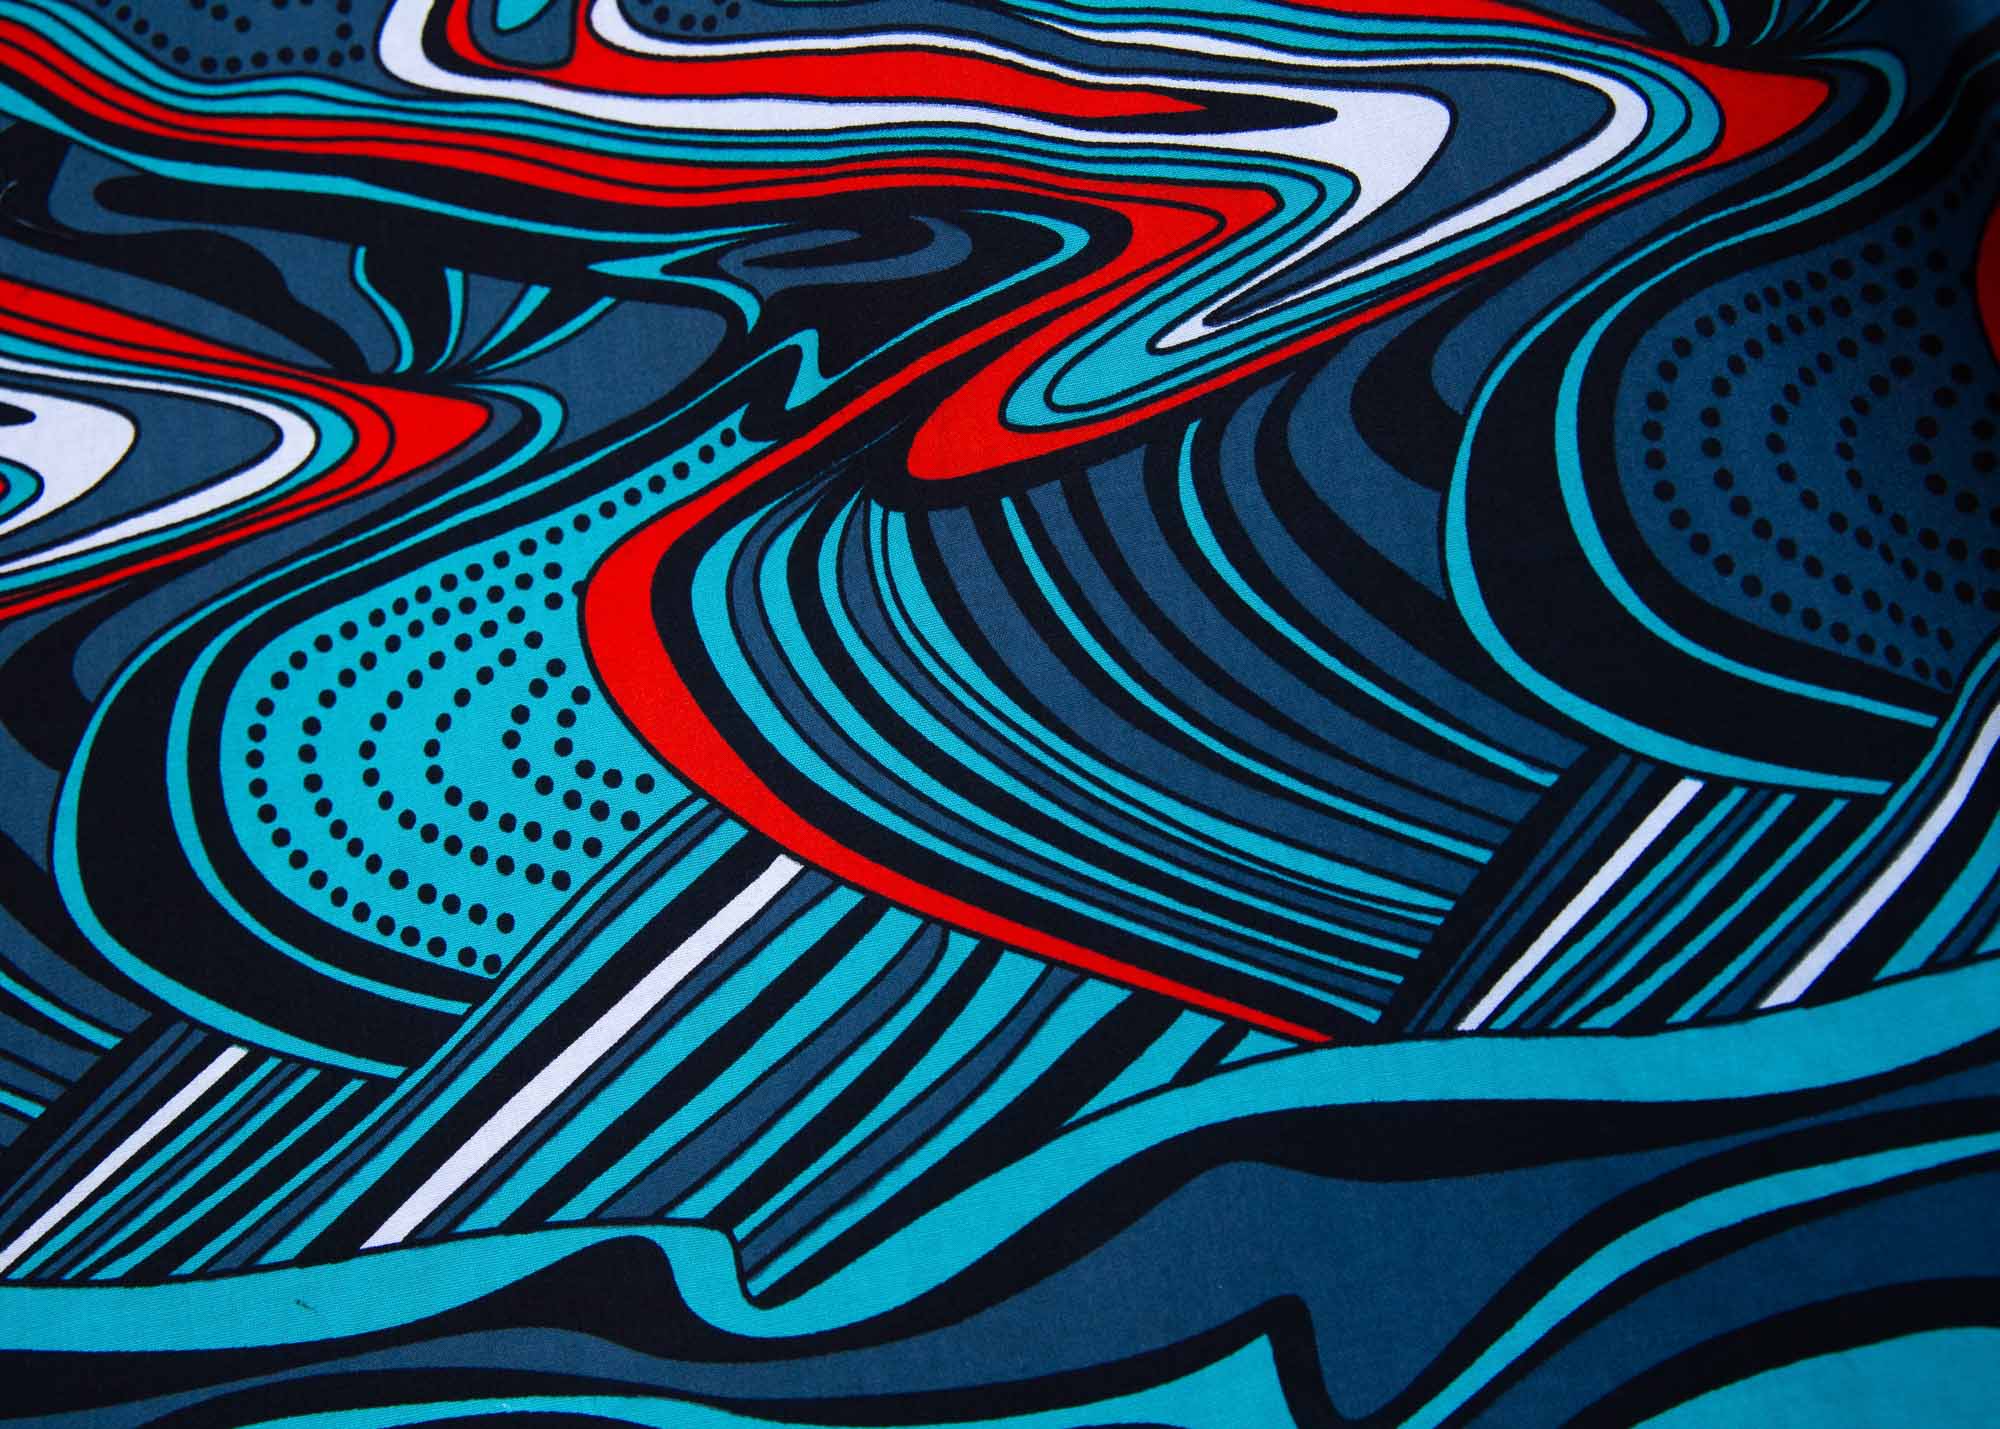 Close up display of turquoise, black, slate, white and red abstract print dress